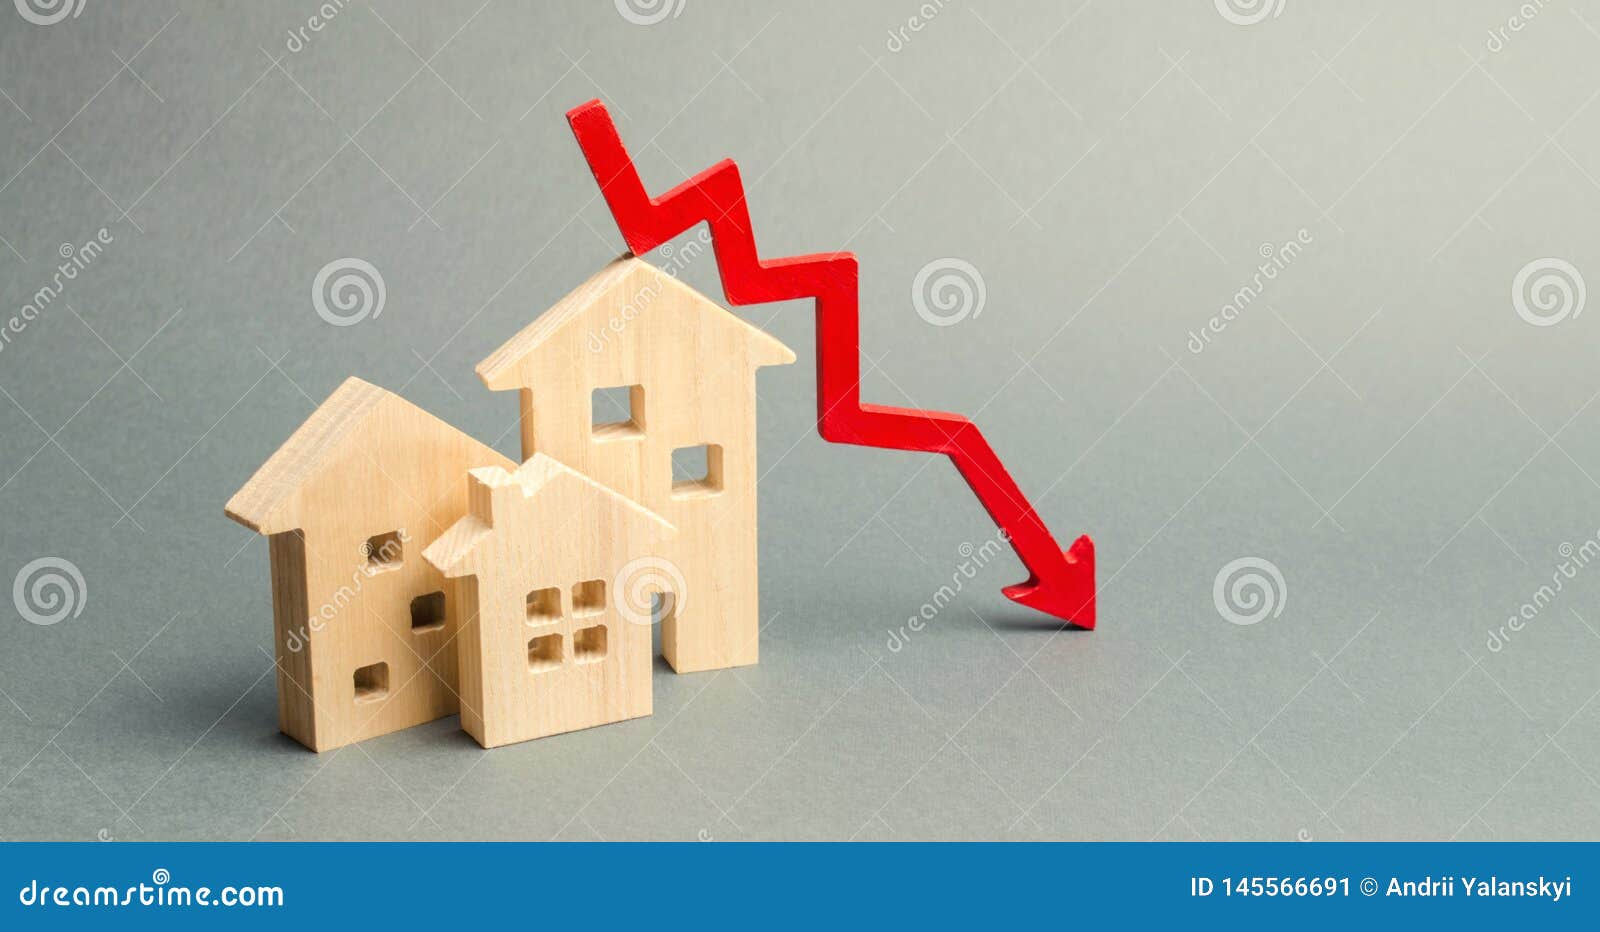 miniature wooden houses and a red arrow down. the concept of low cost real estate. lower mortgage interest rates. falling prices